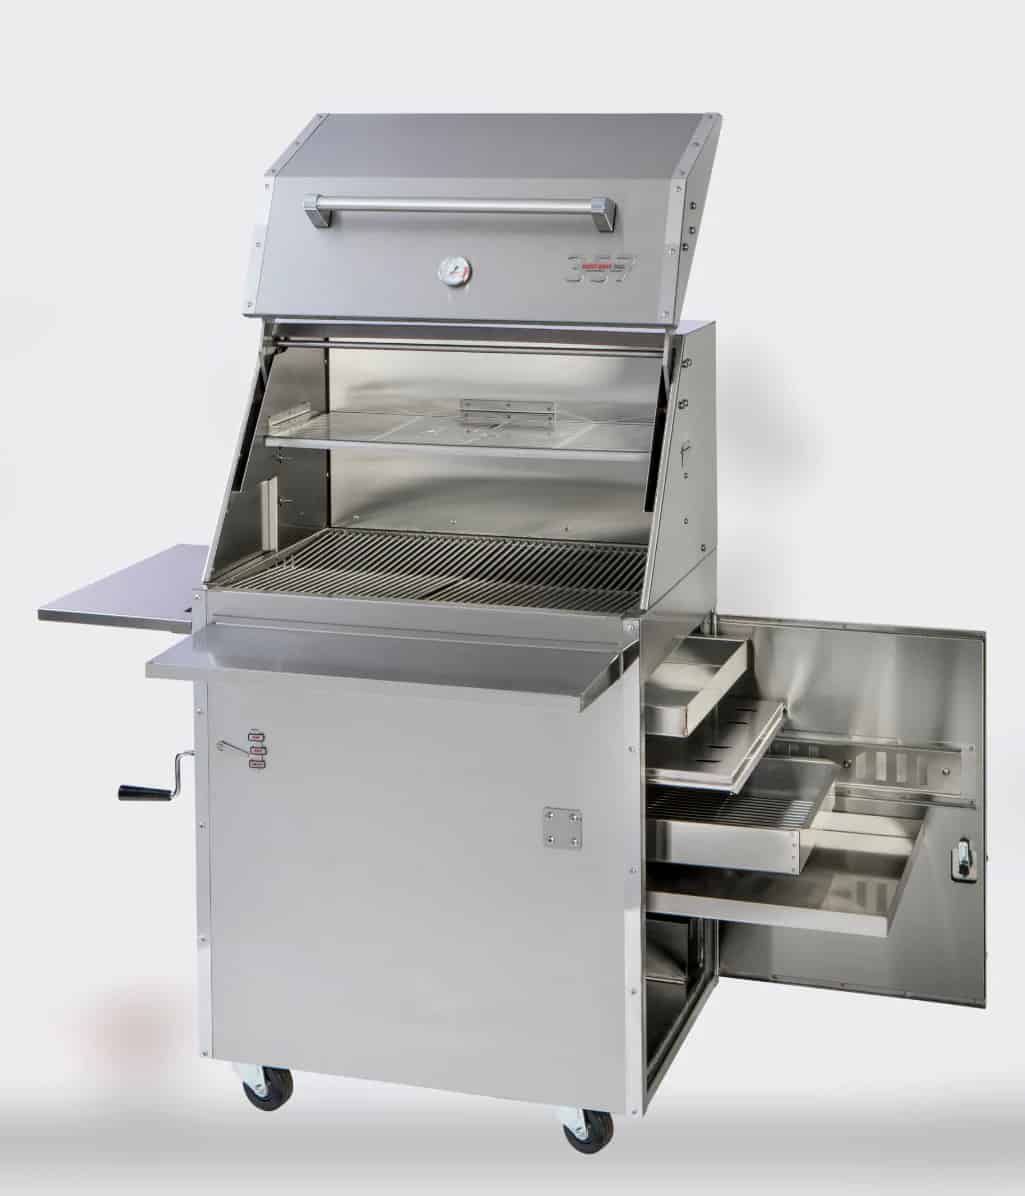 Hasty Bake 357 Pro with lid and all drawers opened